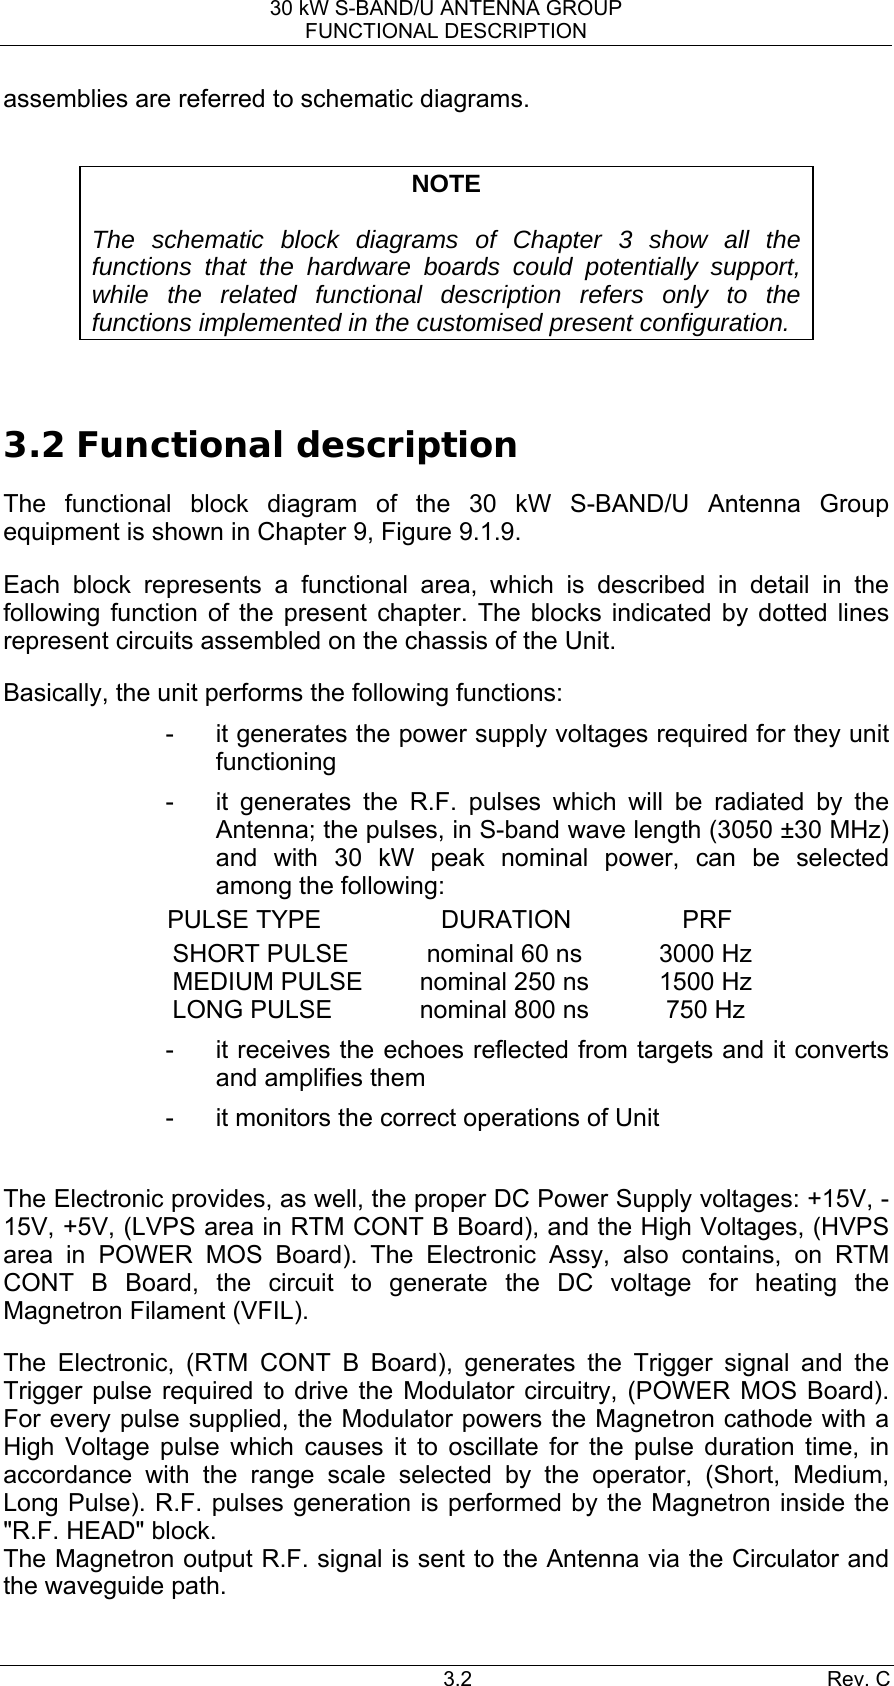 30 kW S-BAND/U ANTENNA GROUP FUNCTIONAL DESCRIPTION 3.2 Rev. C assemblies are referred to schematic diagrams.  NOTE  The schematic block diagrams of Chapter 3 show all the functions that the hardware boards could potentially support, while the related functional description refers only to the functions implemented in the customised present configuration.  3.2 Functional description The functional block diagram of the 30 kW S-BAND/U Antenna Group equipment is shown in Chapter 9, Figure 9.1.9. Each block represents a functional area, which is described in detail in the following function of the present chapter. The blocks indicated by dotted lines represent circuits assembled on the chassis of the Unit. Basically, the unit performs the following functions: -  it generates the power supply voltages required for they unit functioning -  it generates the R.F. pulses which will be radiated by the Antenna; the pulses, in S-band wave length (3050 ±30 MHz) and with 30 kW peak nominal power, can be selected among the following: PULSE TYPE  DURATION  PRF SHORT PULSE  nominal 60 ns  3000 Hz MEDIUM PULSE  nominal 250 ns  1500 Hz LONG PULSE  nominal 800 ns  750 Hz -  it receives the echoes reflected from targets and it converts and amplifies them -  it monitors the correct operations of Unit  The Electronic provides, as well, the proper DC Power Supply voltages: +15V, -15V, +5V, (LVPS area in RTM CONT B Board), and the High Voltages, (HVPS area in POWER MOS Board). The Electronic Assy, also contains, on RTM CONT B Board, the circuit to generate the DC voltage for heating the Magnetron Filament (VFIL). The Electronic, (RTM CONT B Board), generates the Trigger signal and the Trigger pulse required to drive the Modulator circuitry, (POWER MOS Board). For every pulse supplied, the Modulator powers the Magnetron cathode with a High Voltage pulse which causes it to oscillate for the pulse duration time, in accordance with the range scale selected by the operator, (Short, Medium, Long Pulse). R.F. pulses generation is performed by the Magnetron inside the &quot;R.F. HEAD&quot; block. The Magnetron output R.F. signal is sent to the Antenna via the Circulator and the waveguide path. 